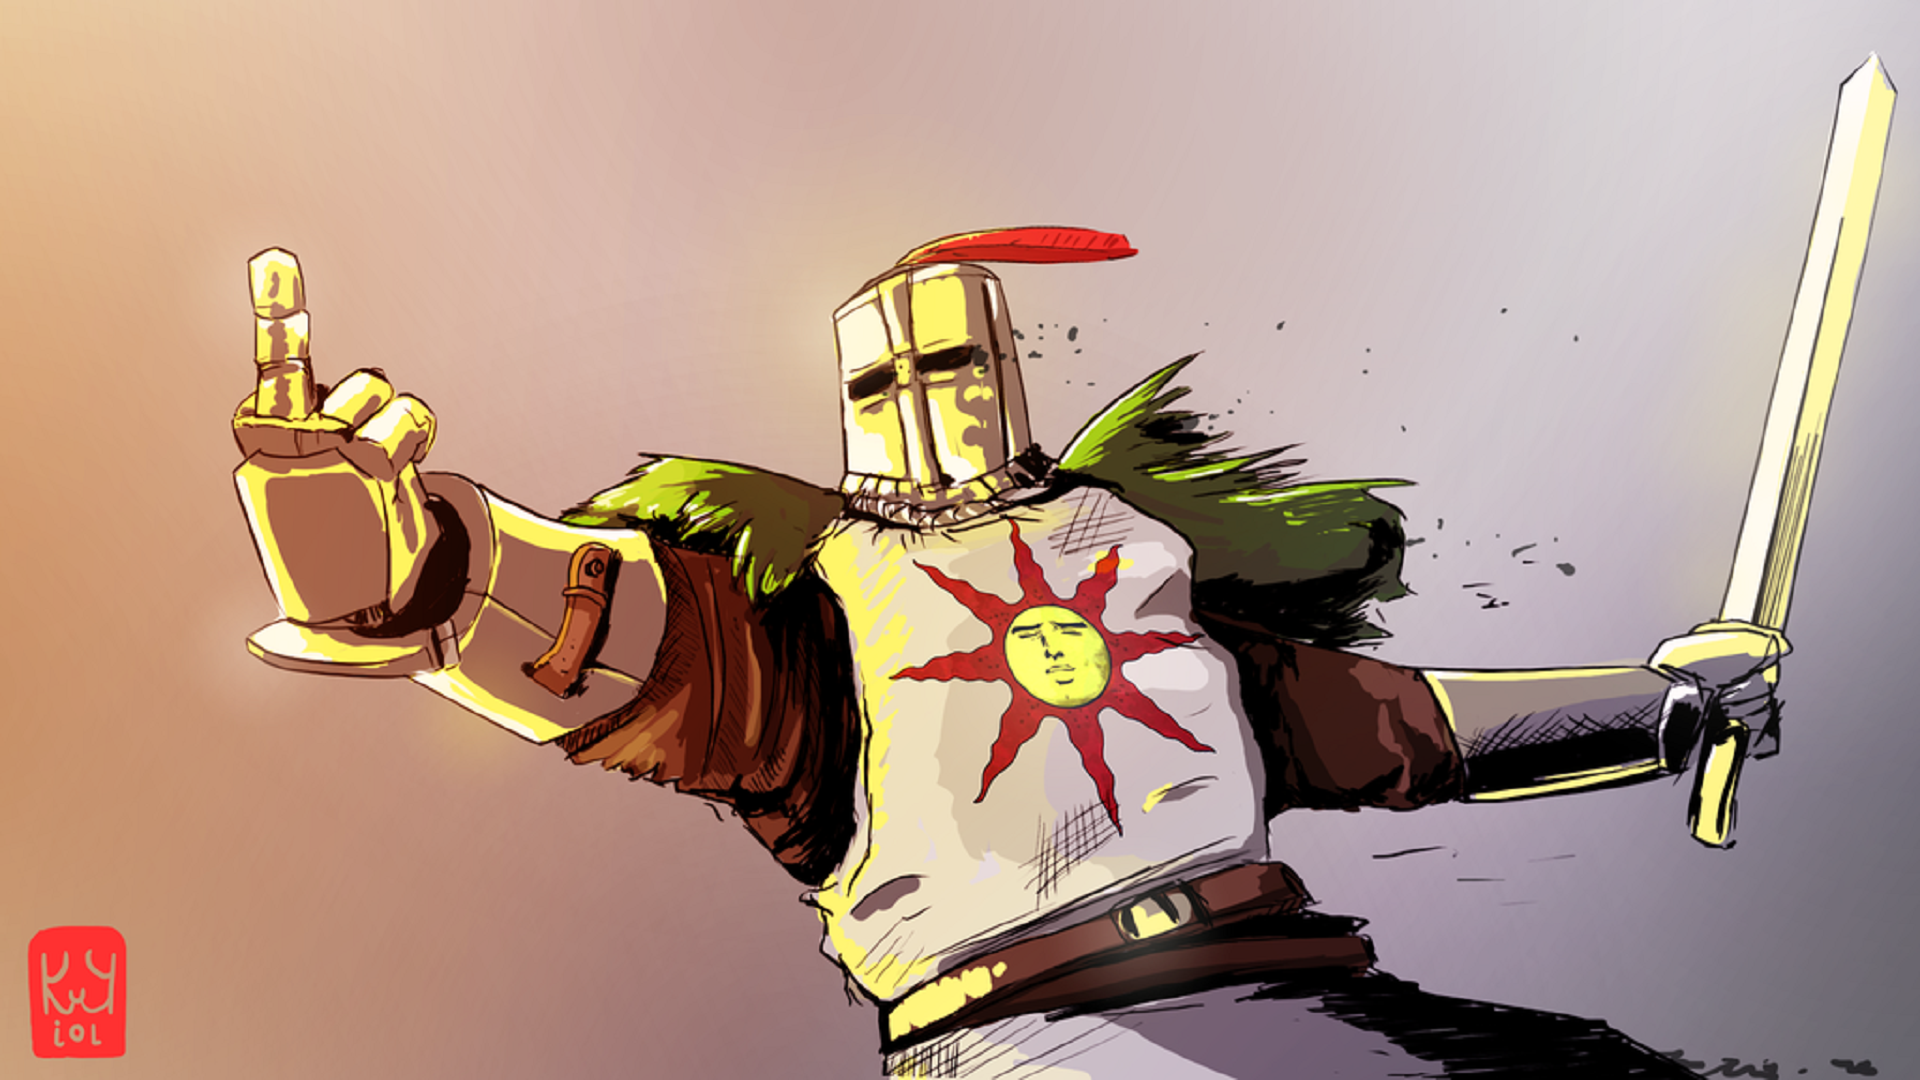 Solaire Of Astora HD Wallpaper Background Image